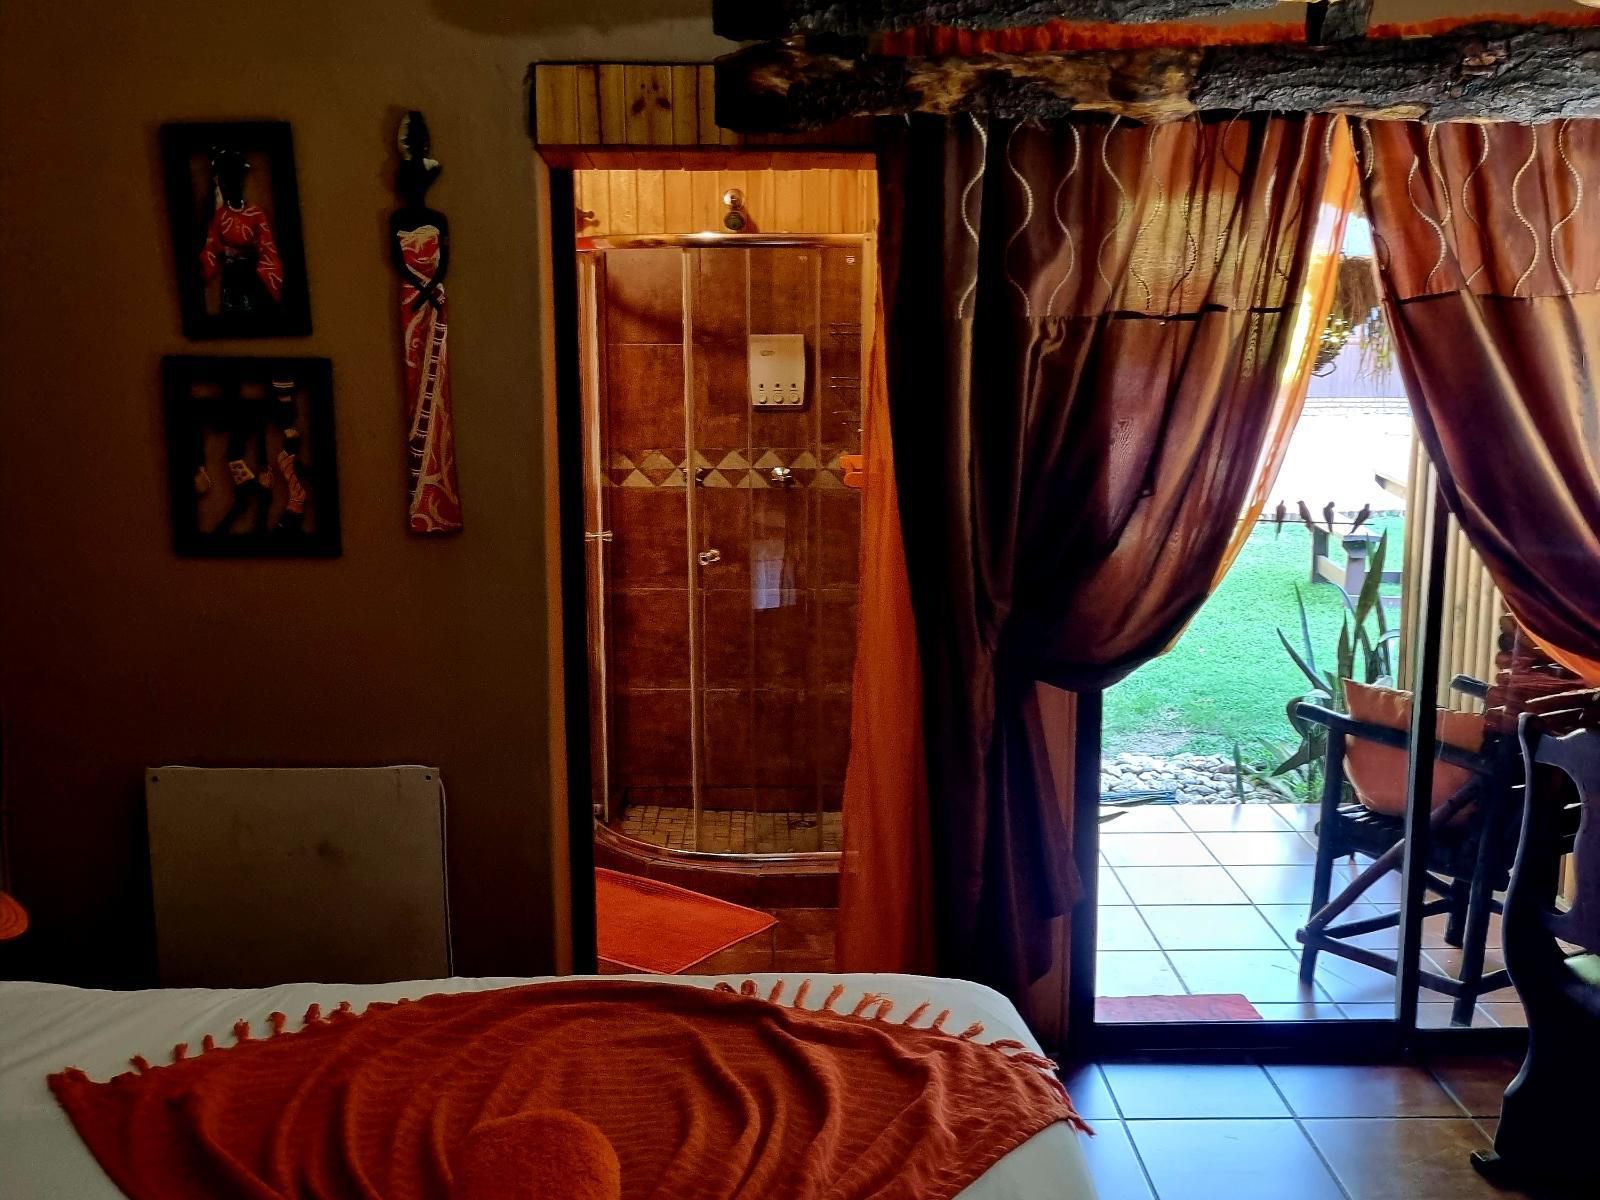 Belihante Lodge Vaalkoppies Settlement Upington Northern Cape South Africa Colorful, Bedroom